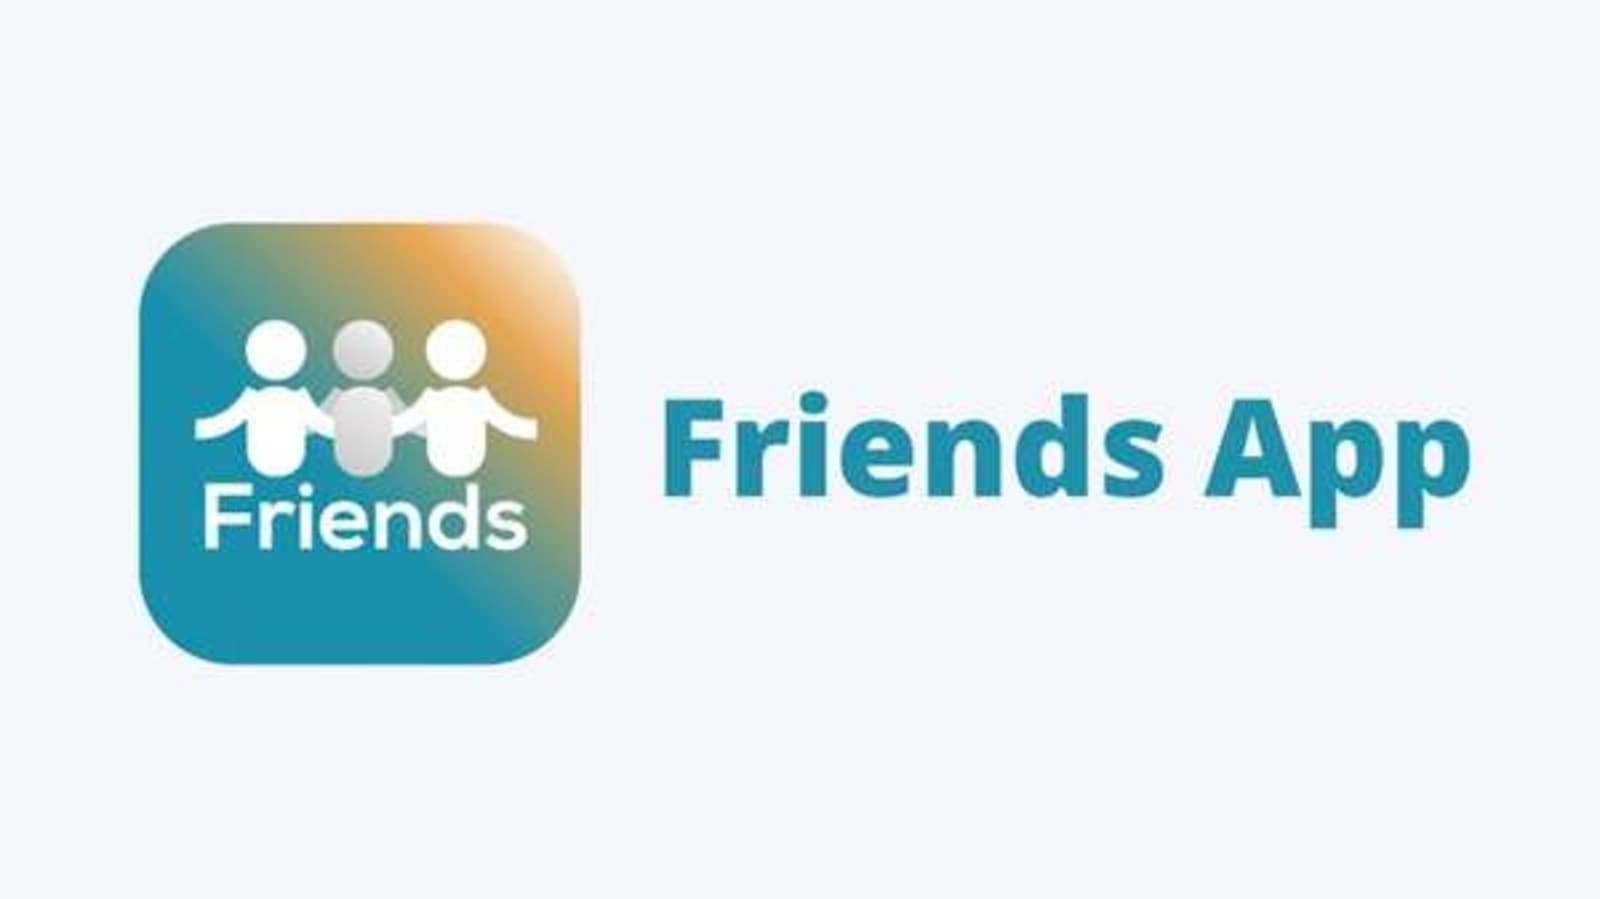 Friends App's community-driven approach brings in a better social experience